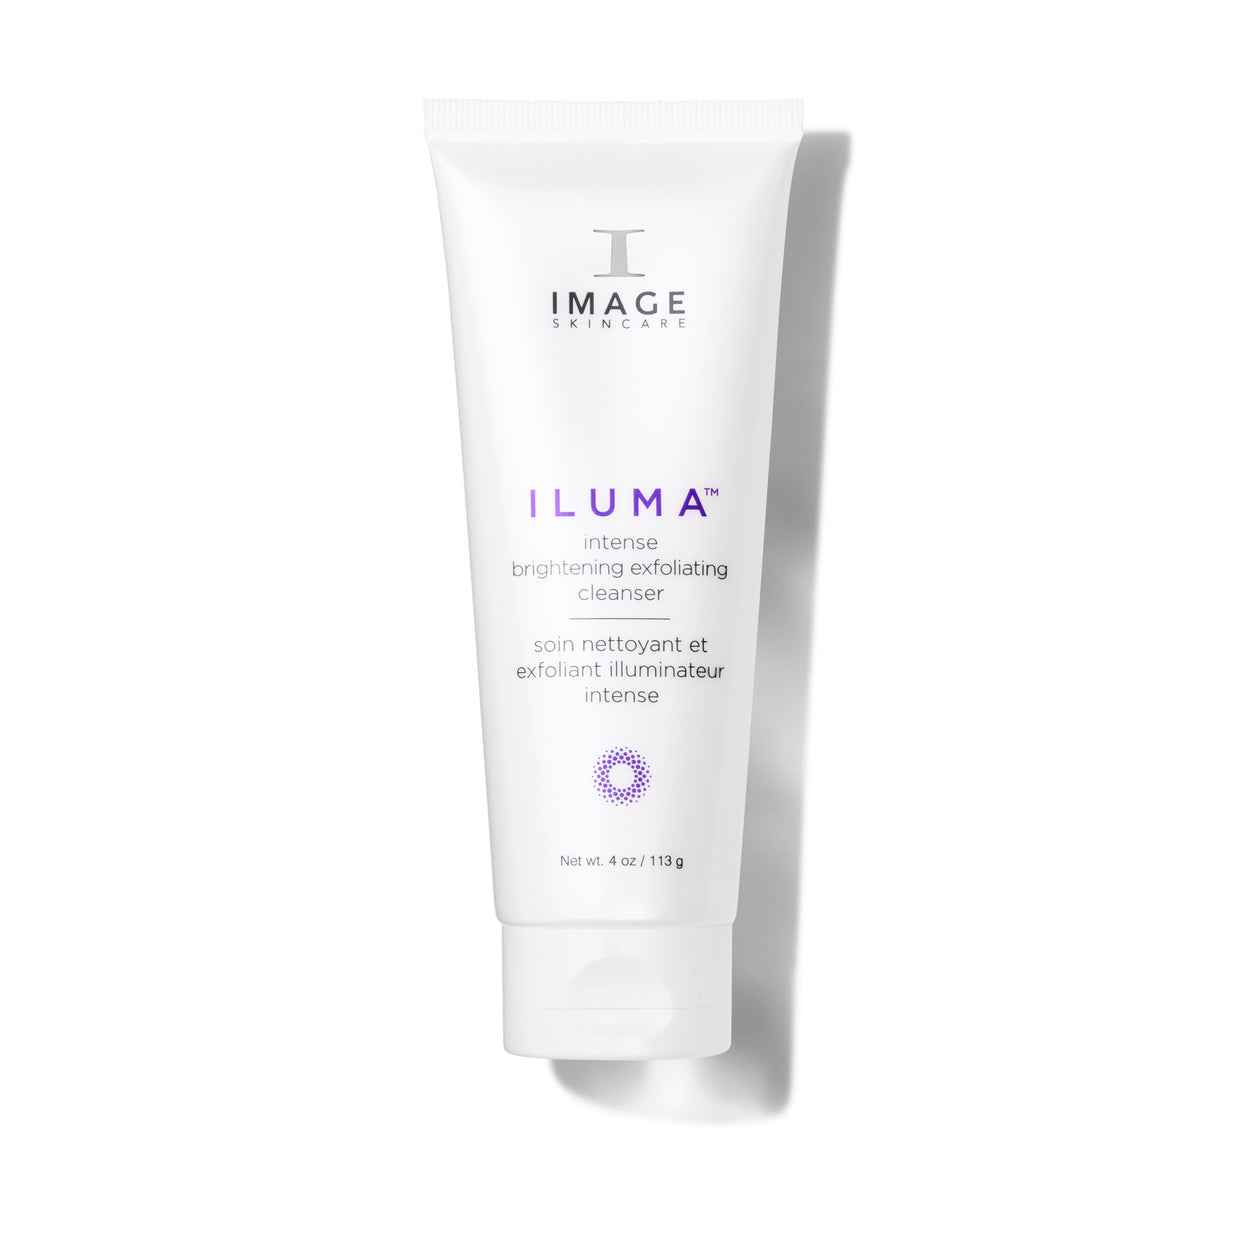 Image Skincare Iluma Intense Brightening Exfoliating Cleanser Shop At Exclusive Beauty